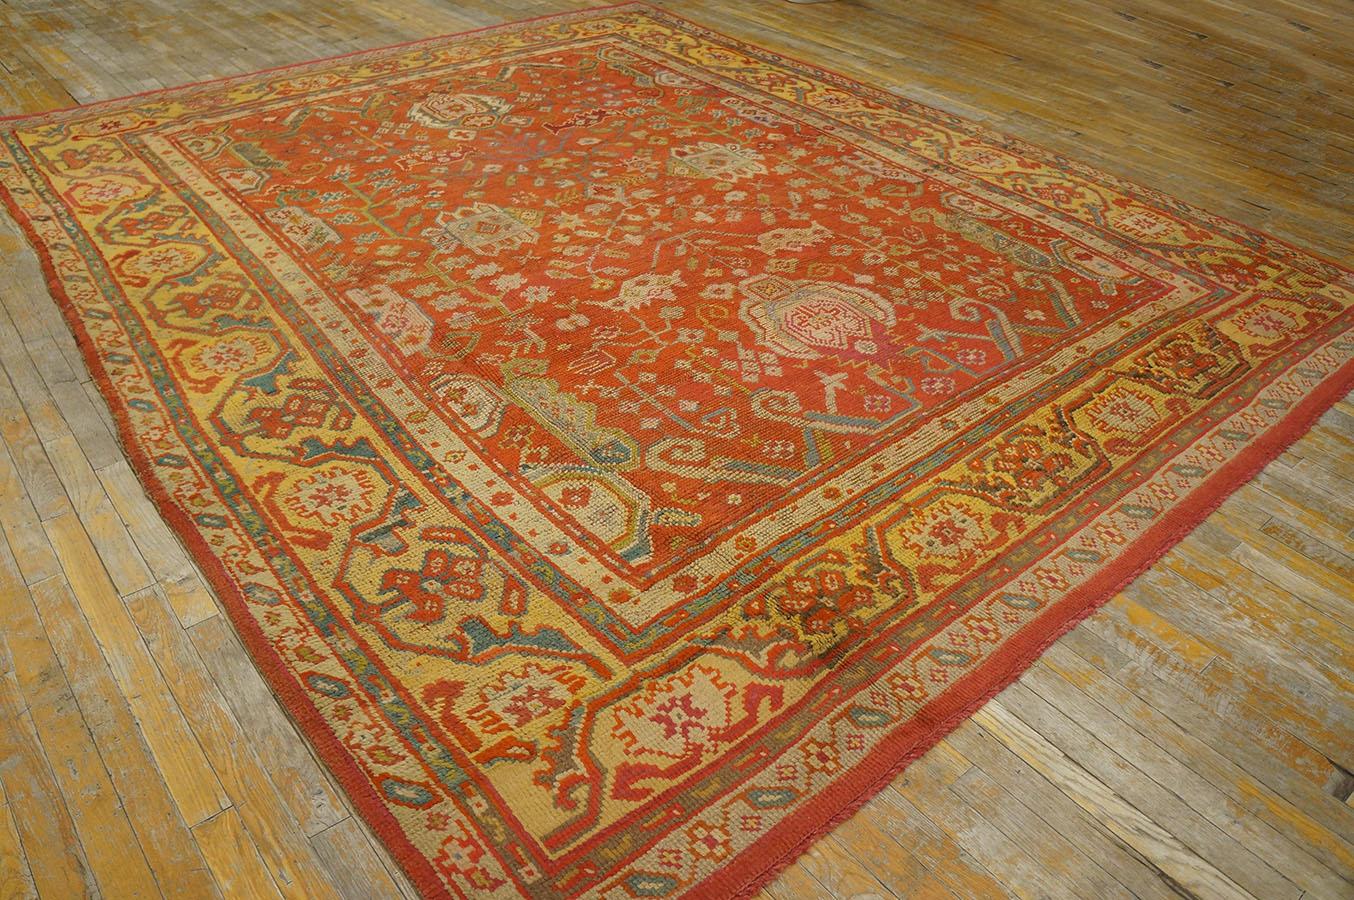 19th Century Turkish Oushak Carpet ( 9' x 11' - 275 x 335 )  In Good Condition For Sale In New York, NY